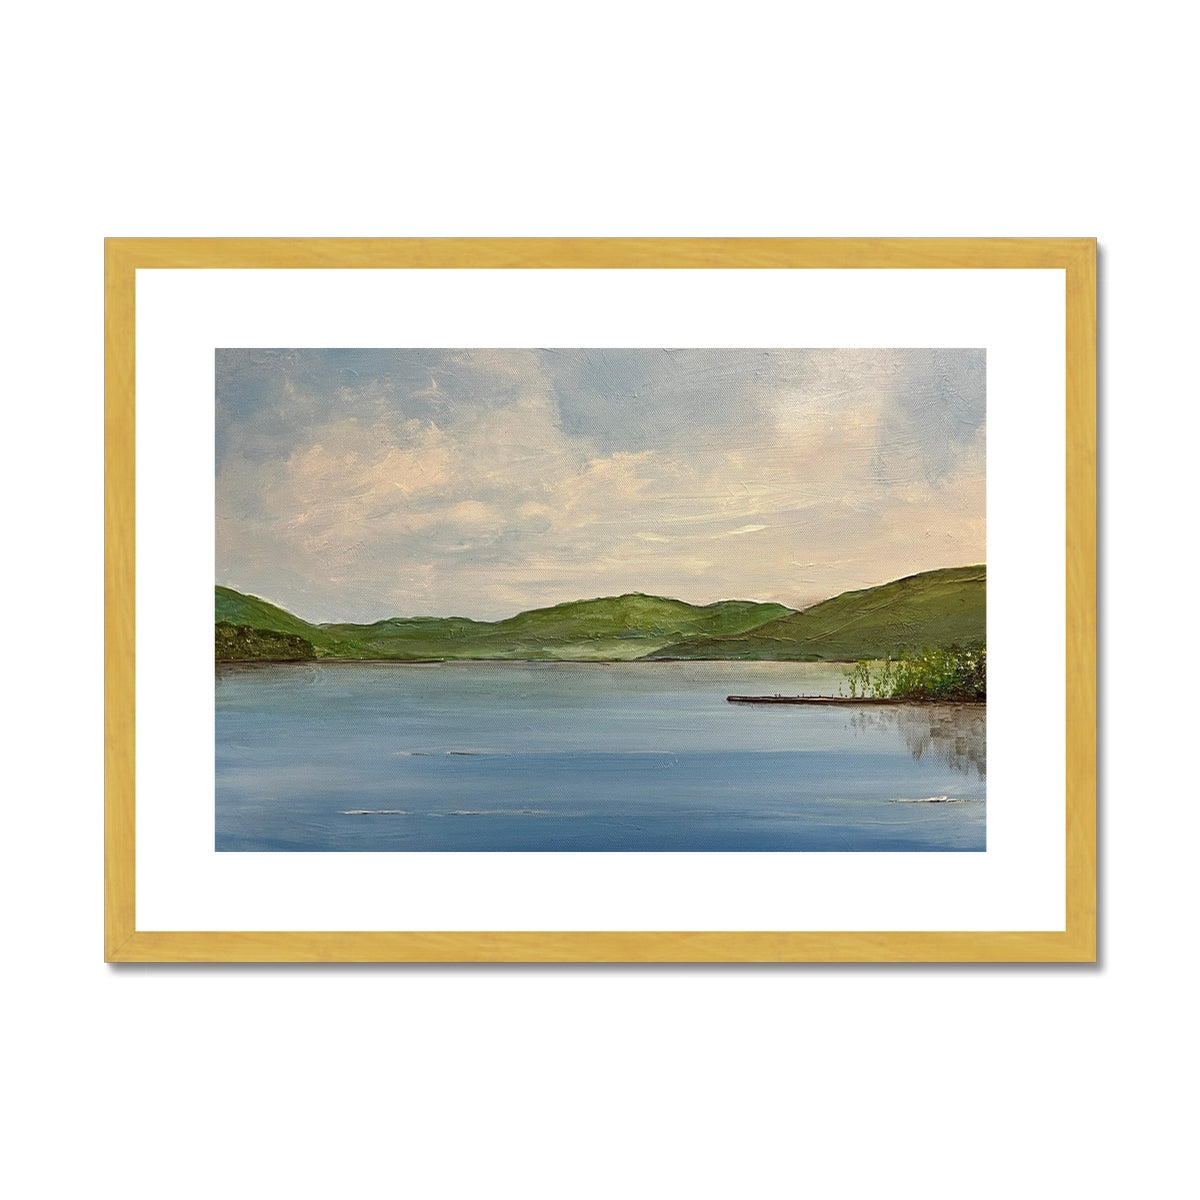 Loch Tay ii Painting | Antique Framed & Mounted Prints From Scotland-Fine art-Scottish Lochs & Mountains Art Gallery-A2 Landscape-Gold Frame-Paintings, Prints, Homeware, Art Gifts From Scotland By Scottish Artist Kevin Hunter